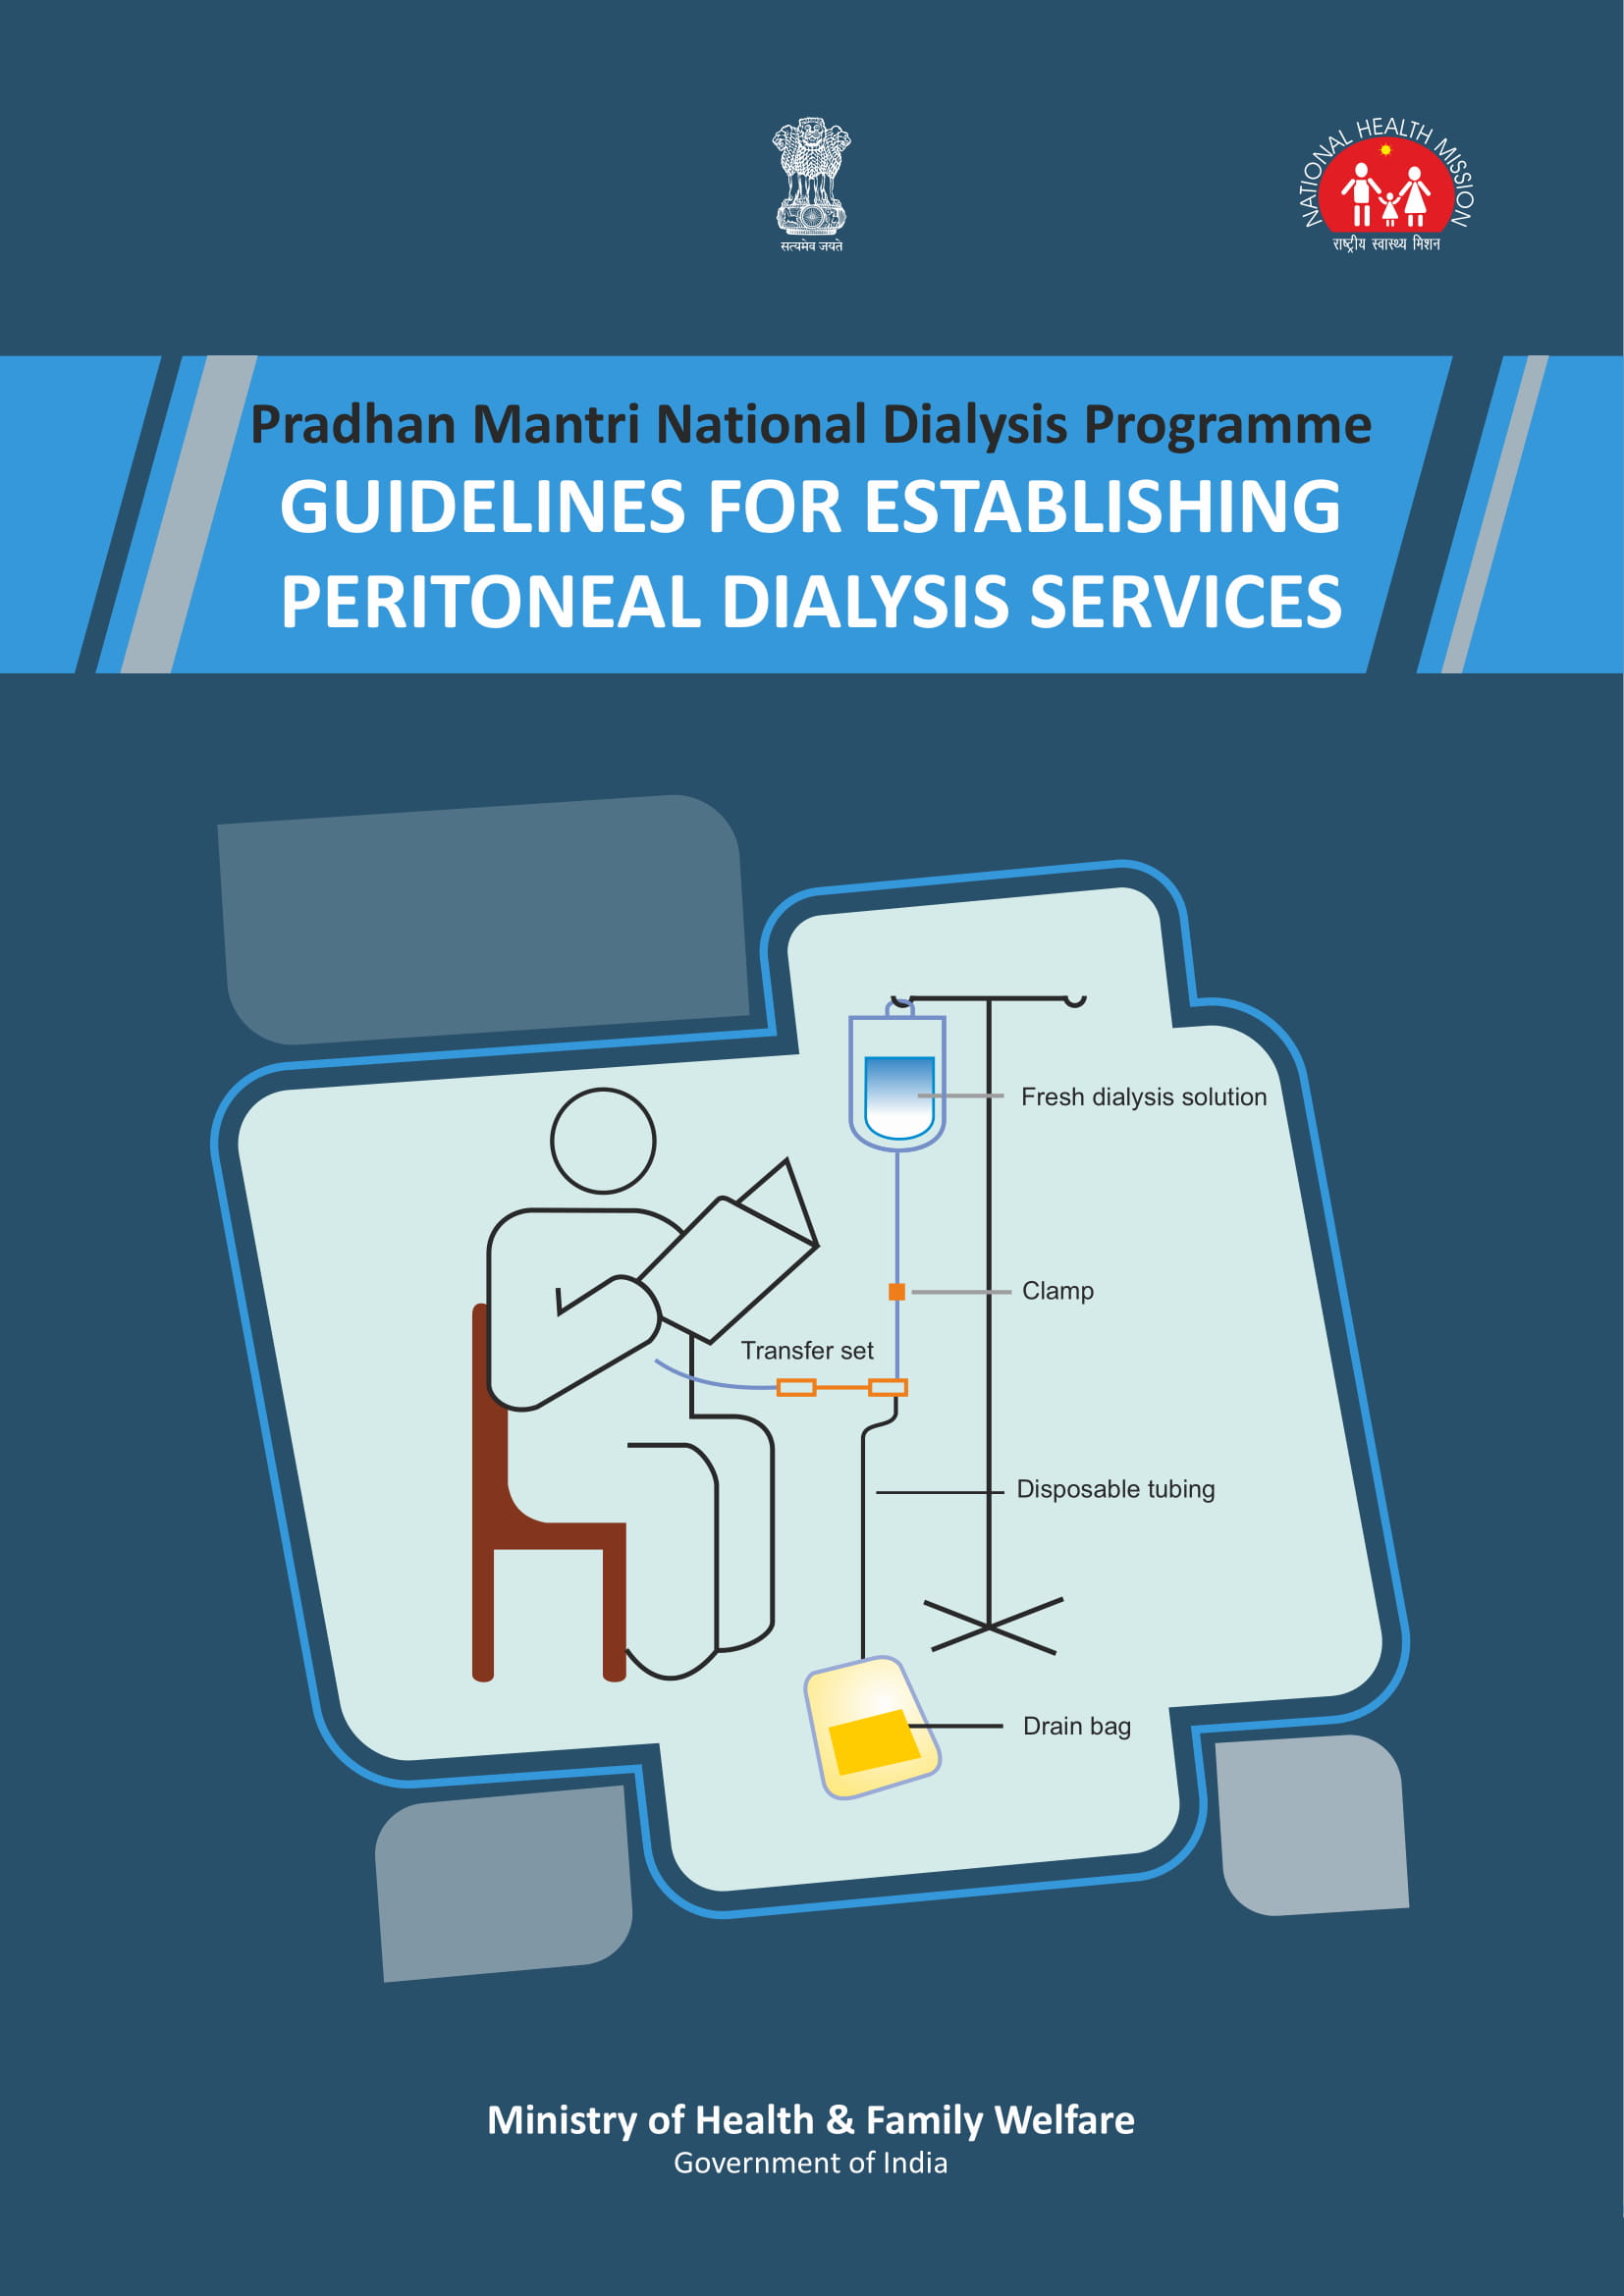 Guidelines for PMNDP